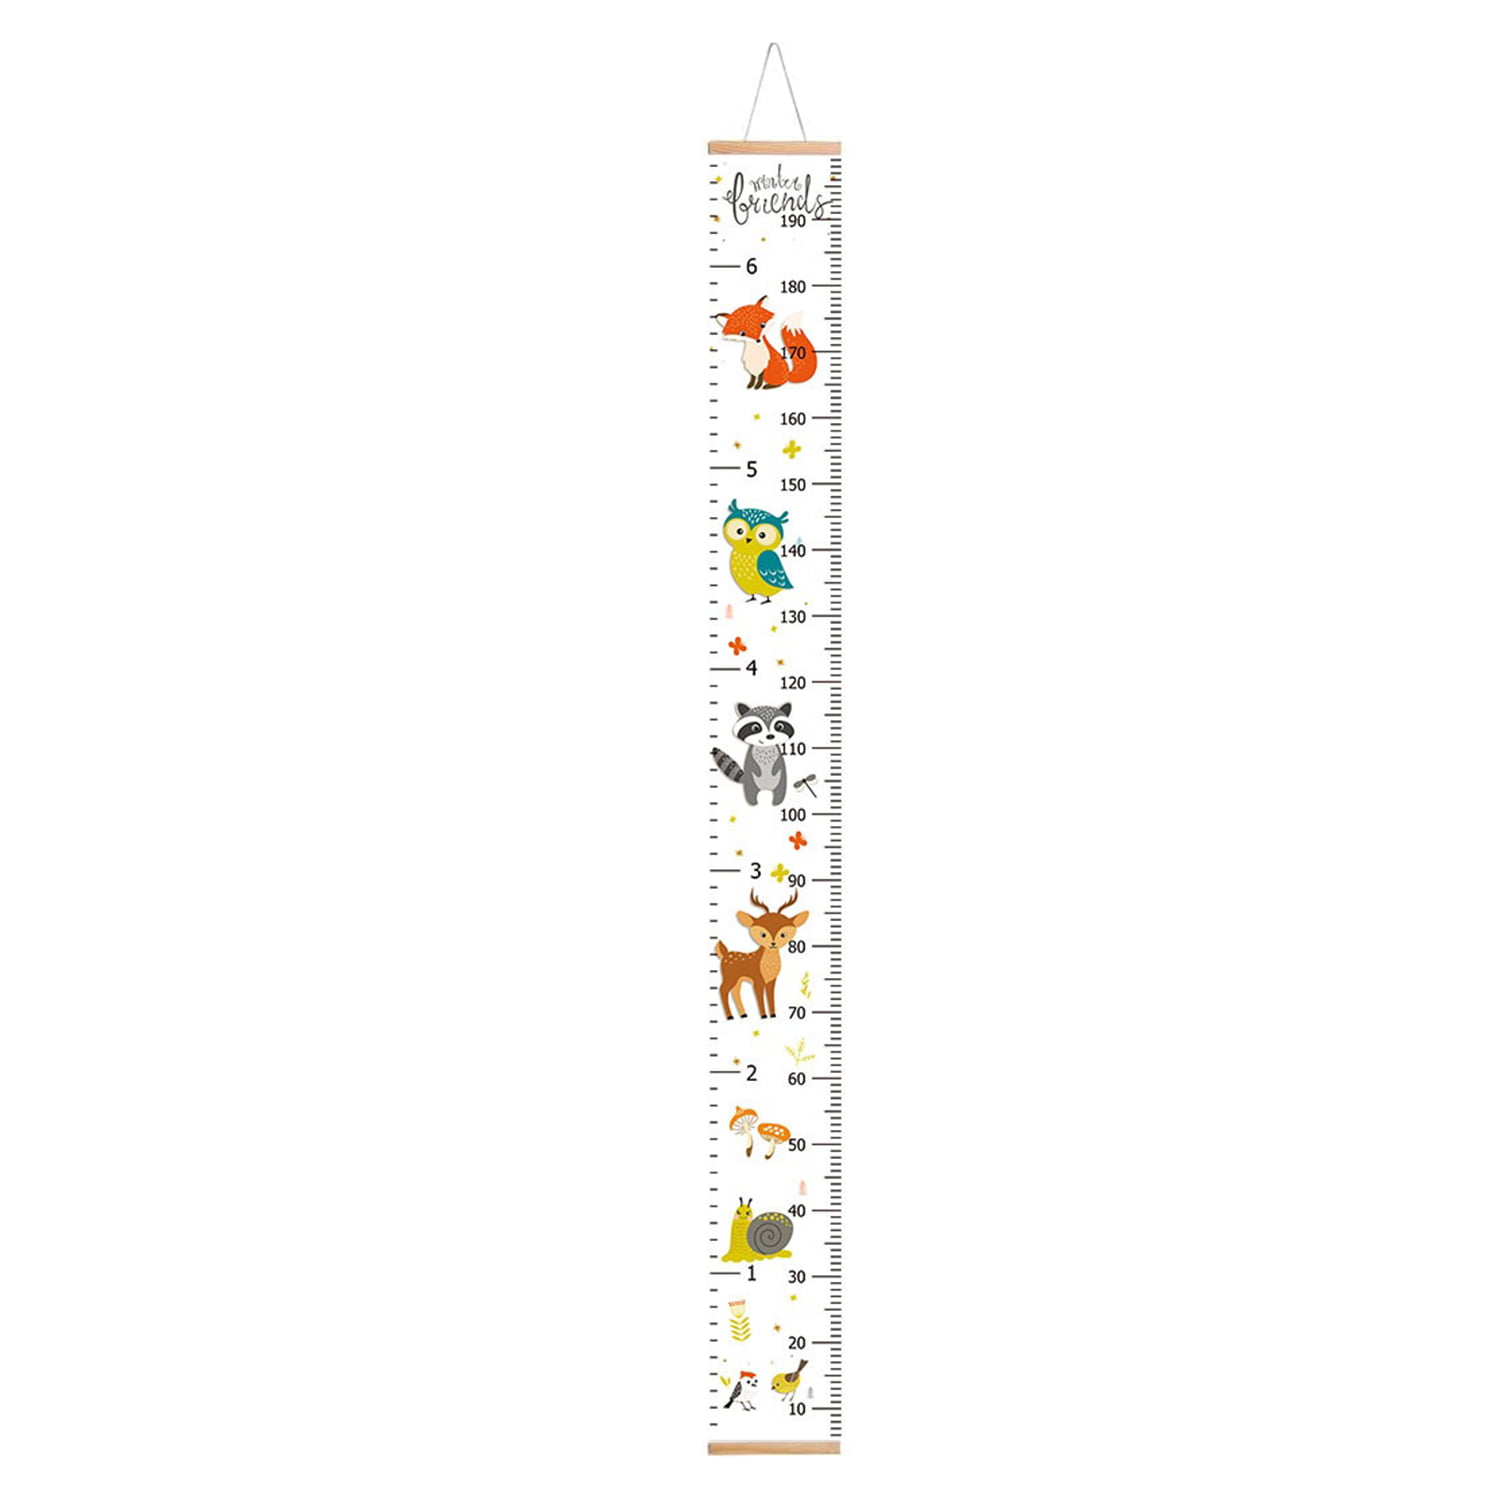 A TKSTAR Removable Growth Chart Handing Ruler Wall Decor for Kids Wood Frame Height Measurement Rulers JU-BR04